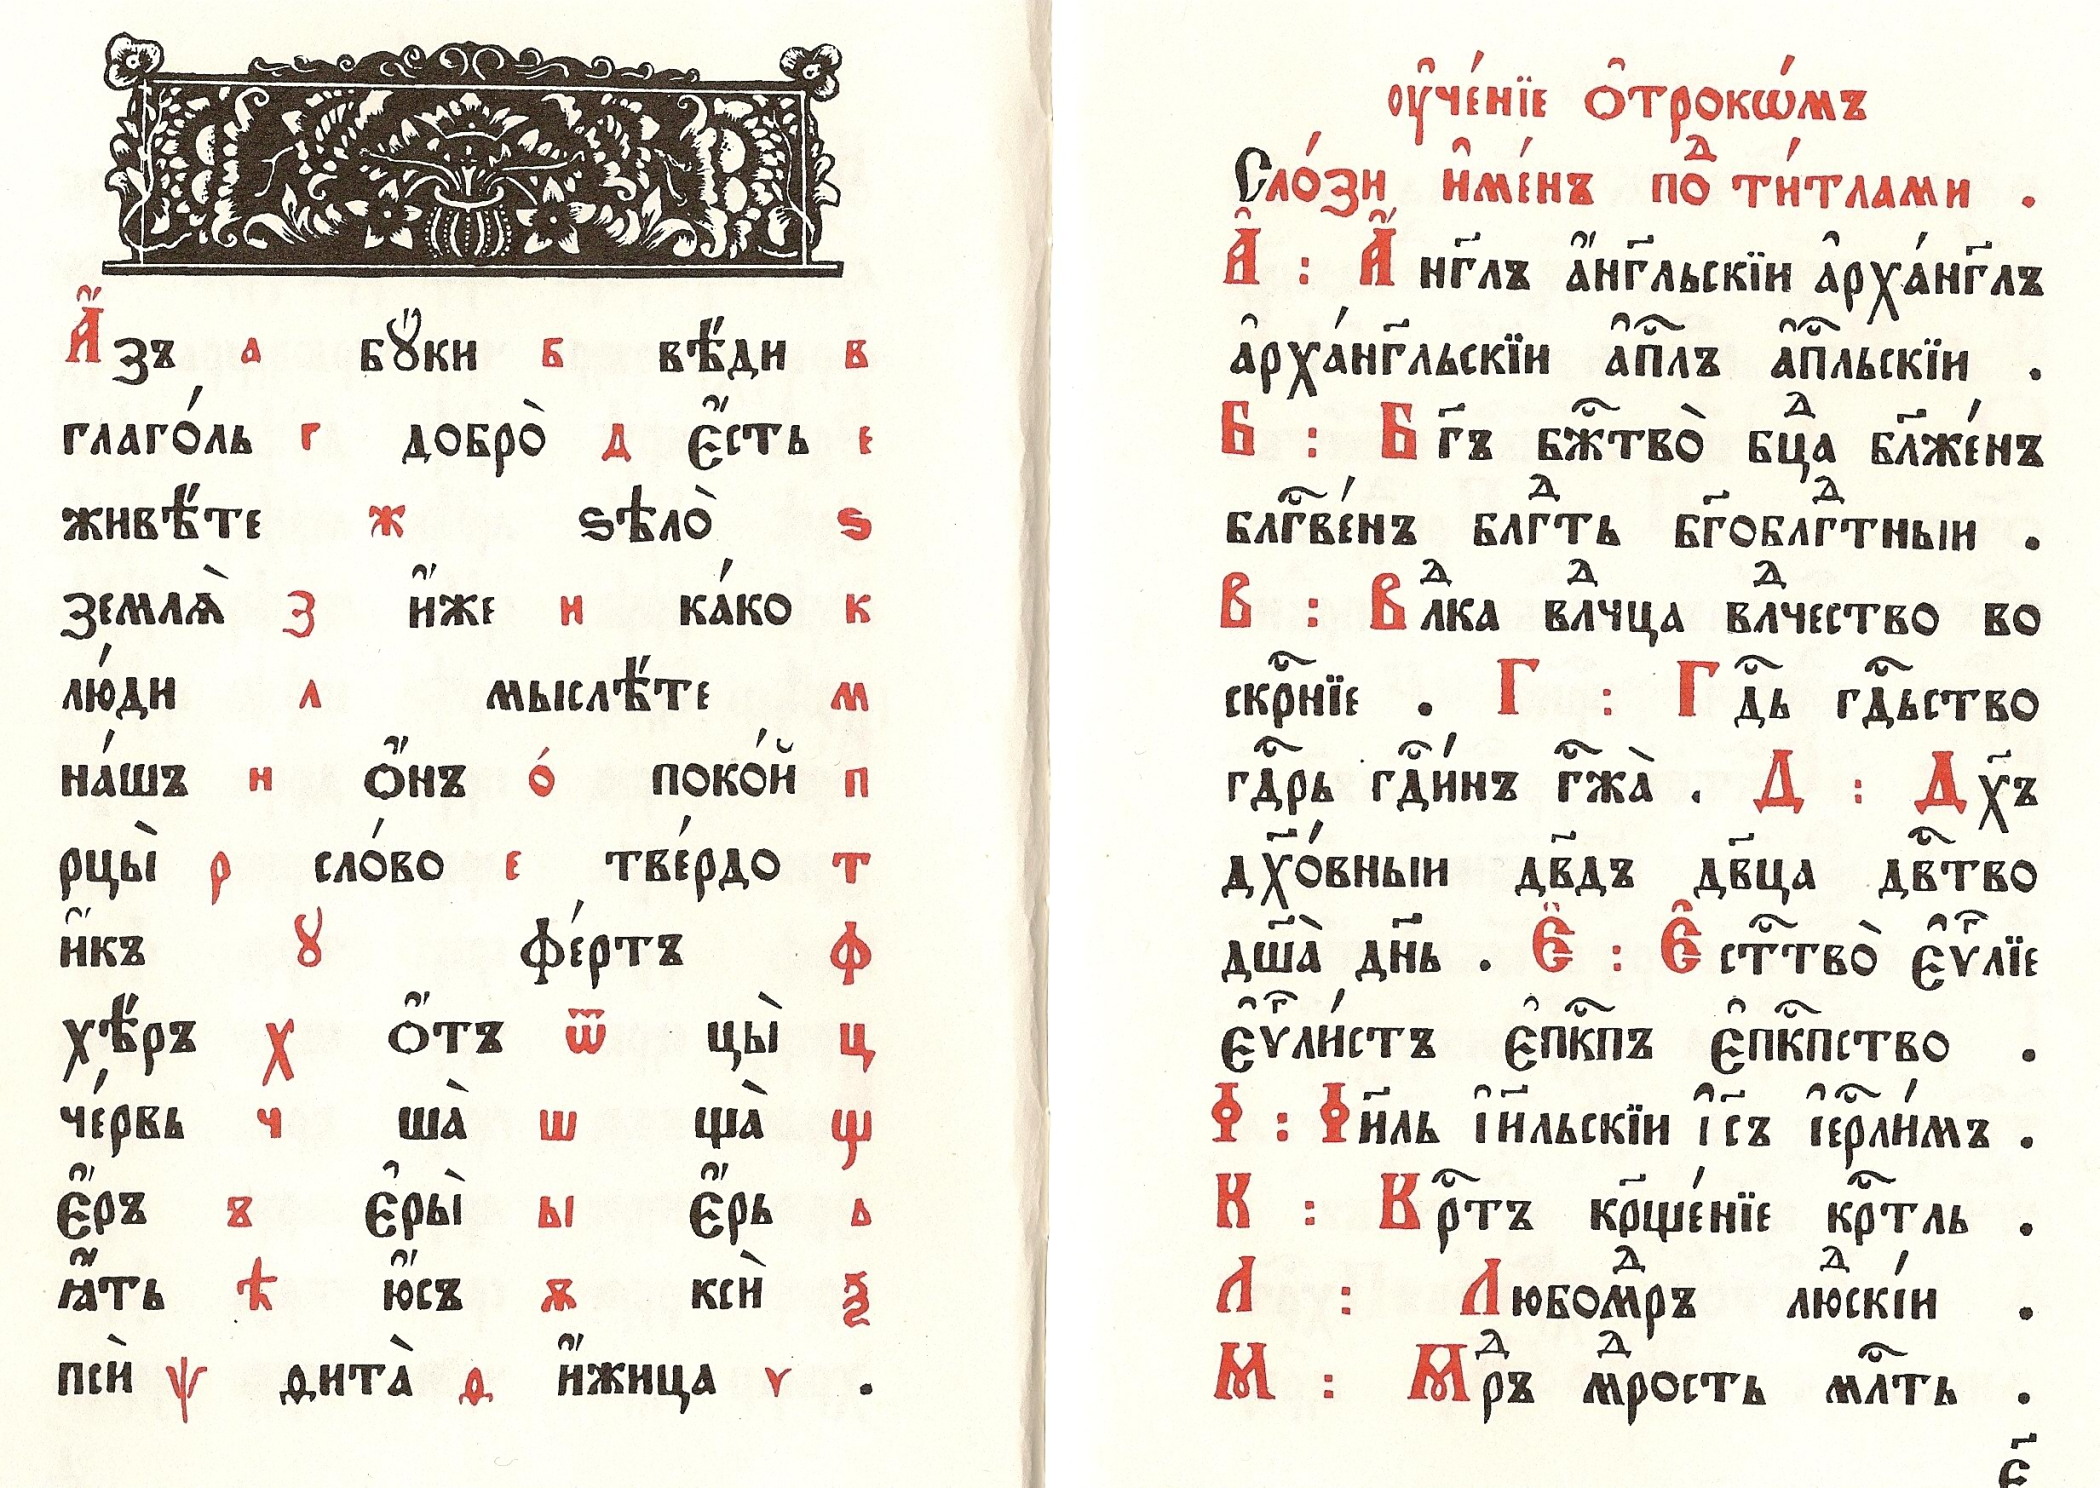 Slavonic With Old Russian 9